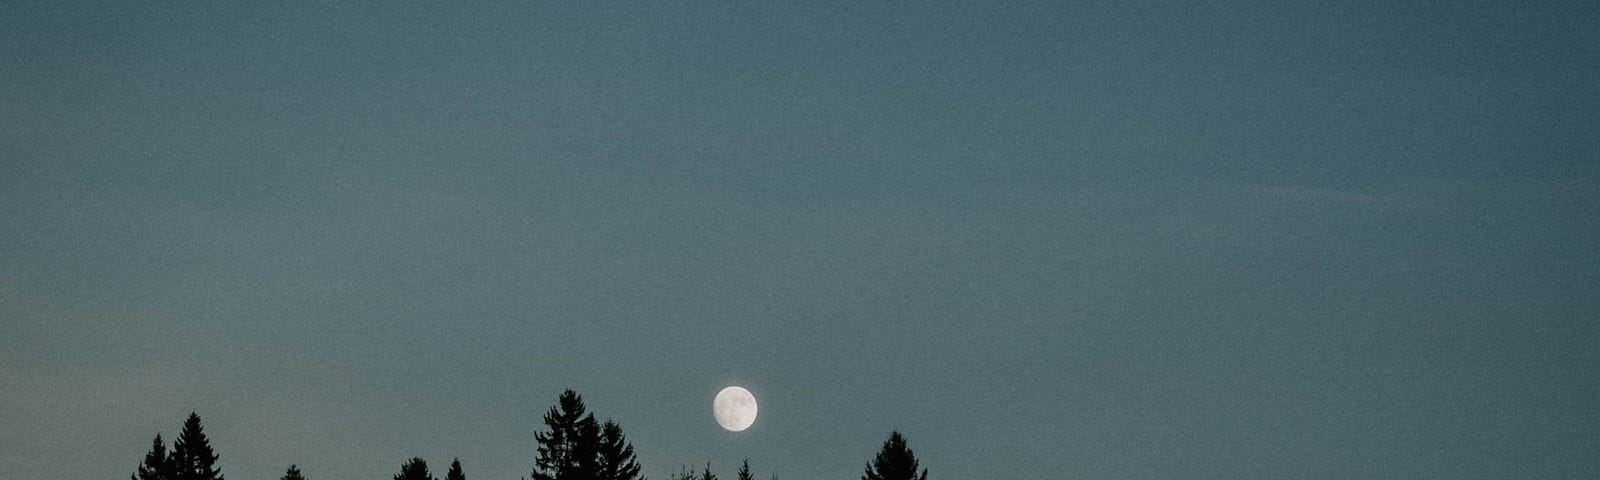 A row of reaching pine trees, black against the moon and the night sky.